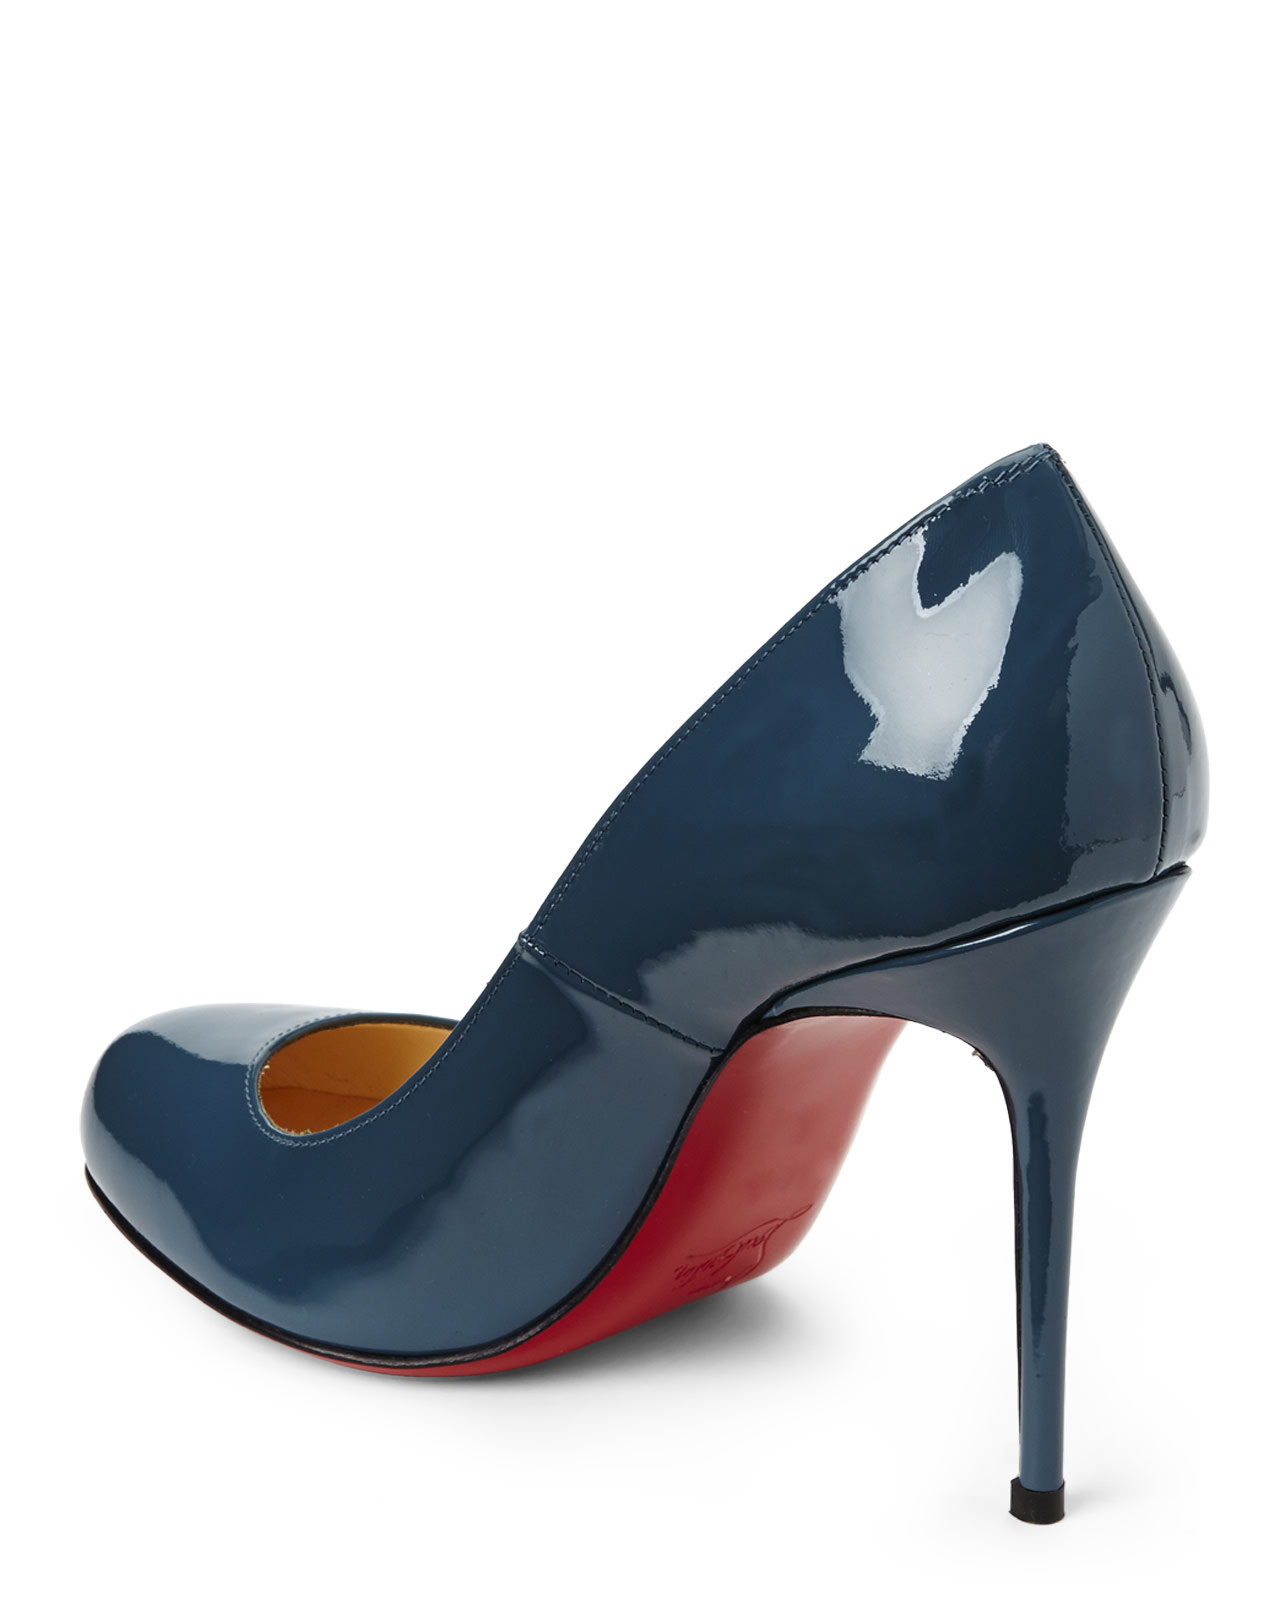 Christian louboutin Turquin Fifi Patent Pumps in Blue (TURQUIN) | Lyst  